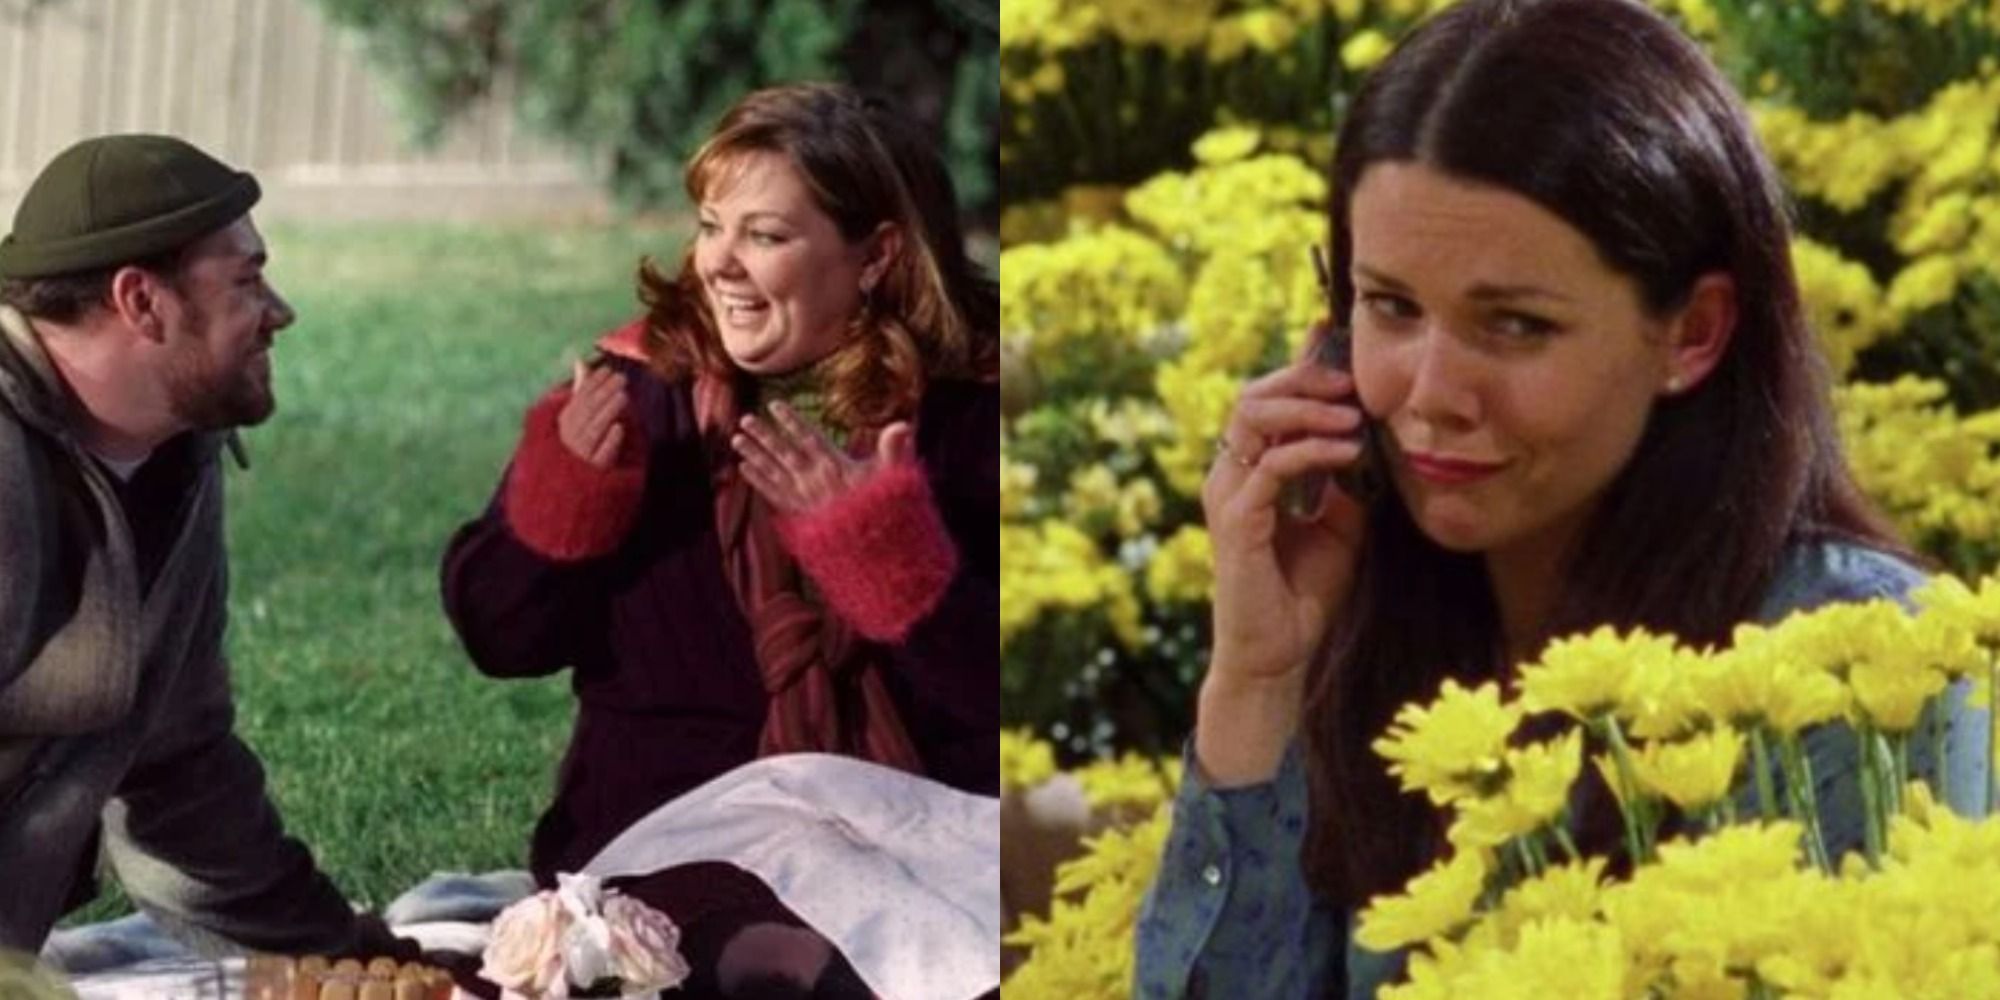 Two side by side images from Gilmore Girls showing romantic scenes